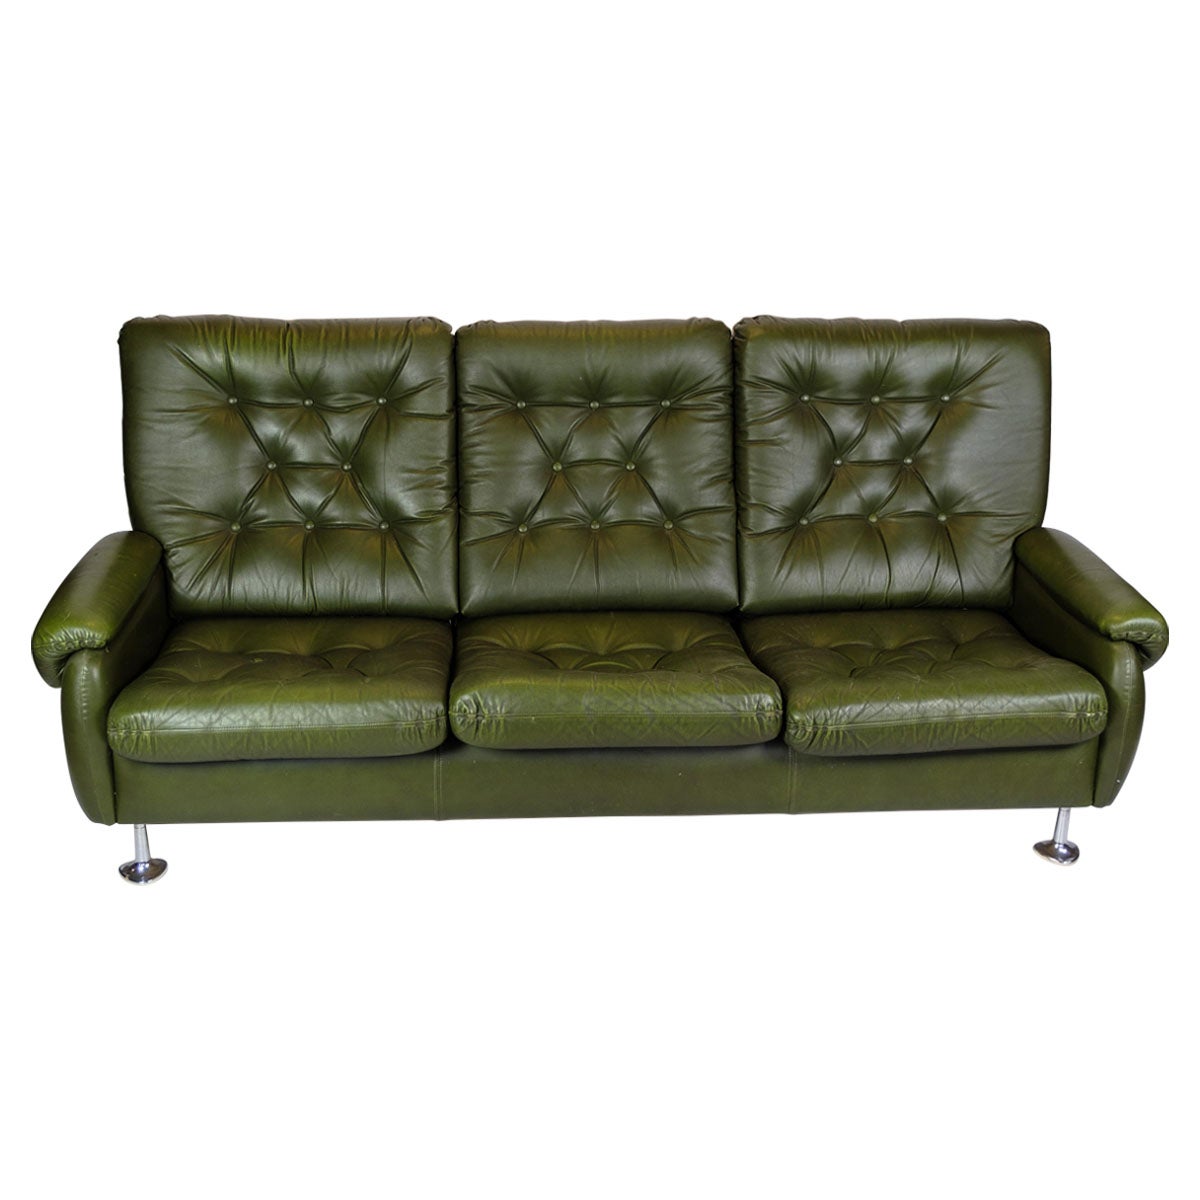 3-Seater Sofa of Dark Green Leather with Chrome Legs from the 1970 For Sale